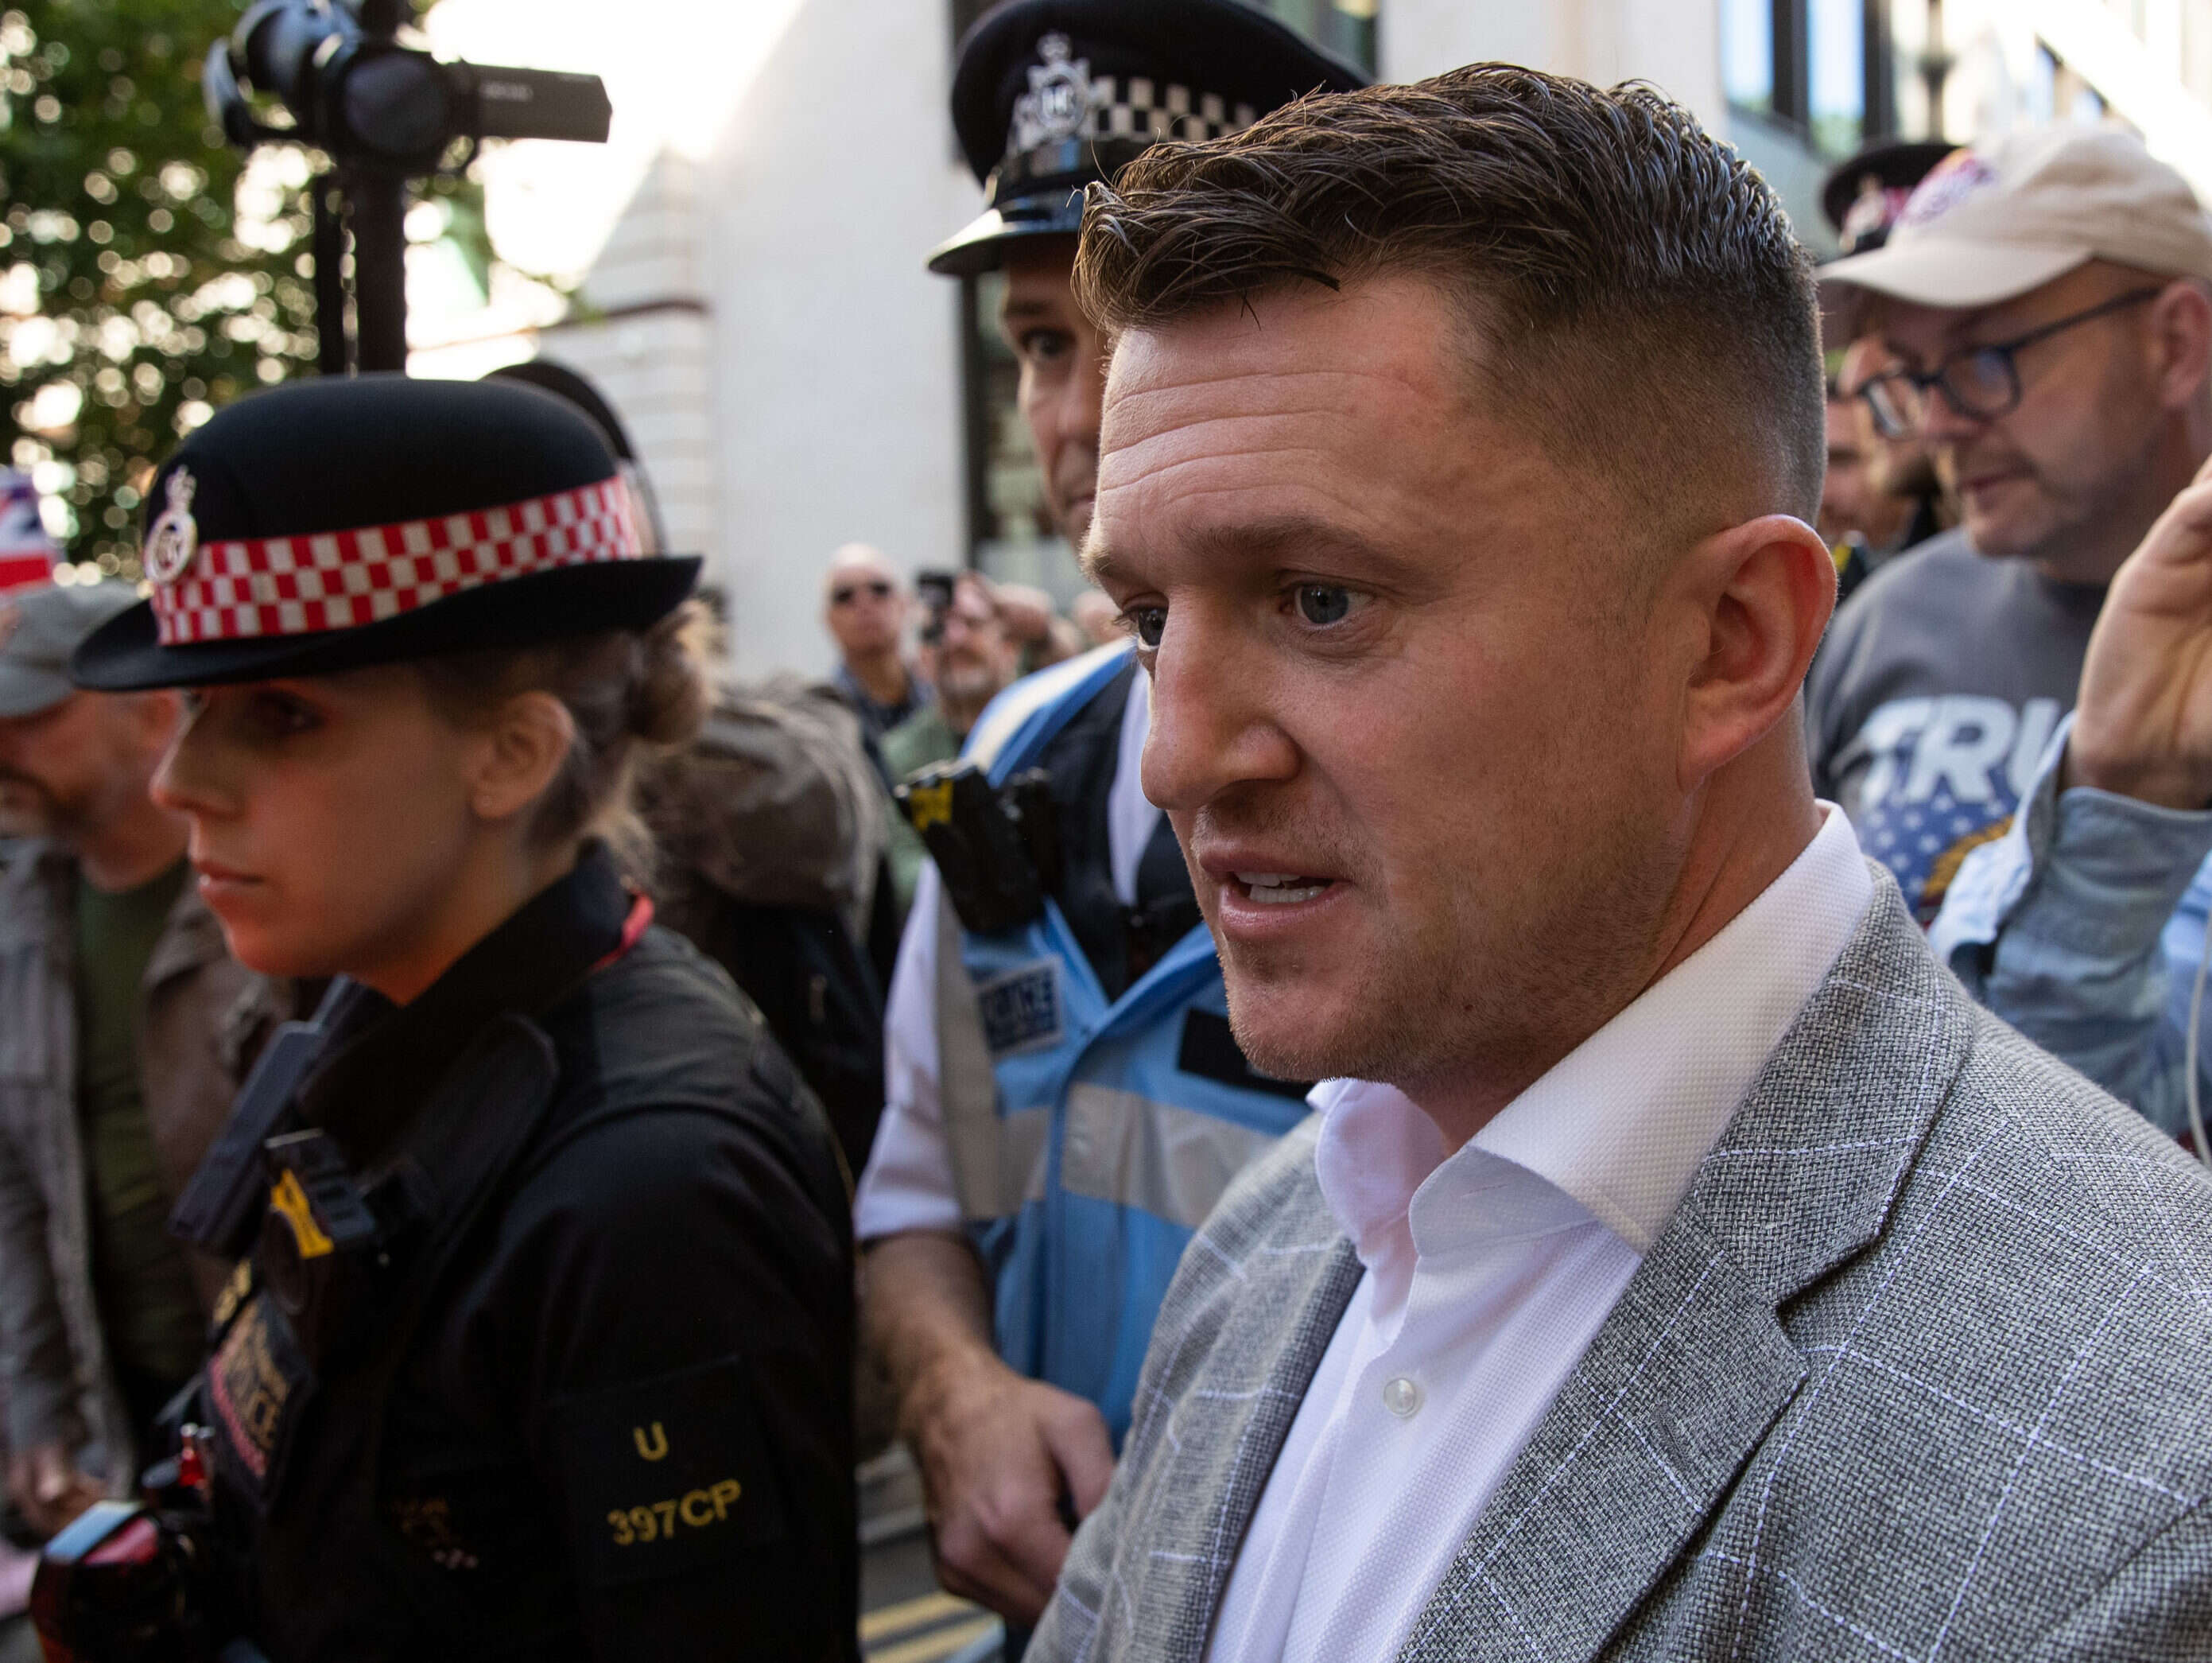 Tommy Robinson's live broadcast outside court in sex ring case was 'reckless', High Court told